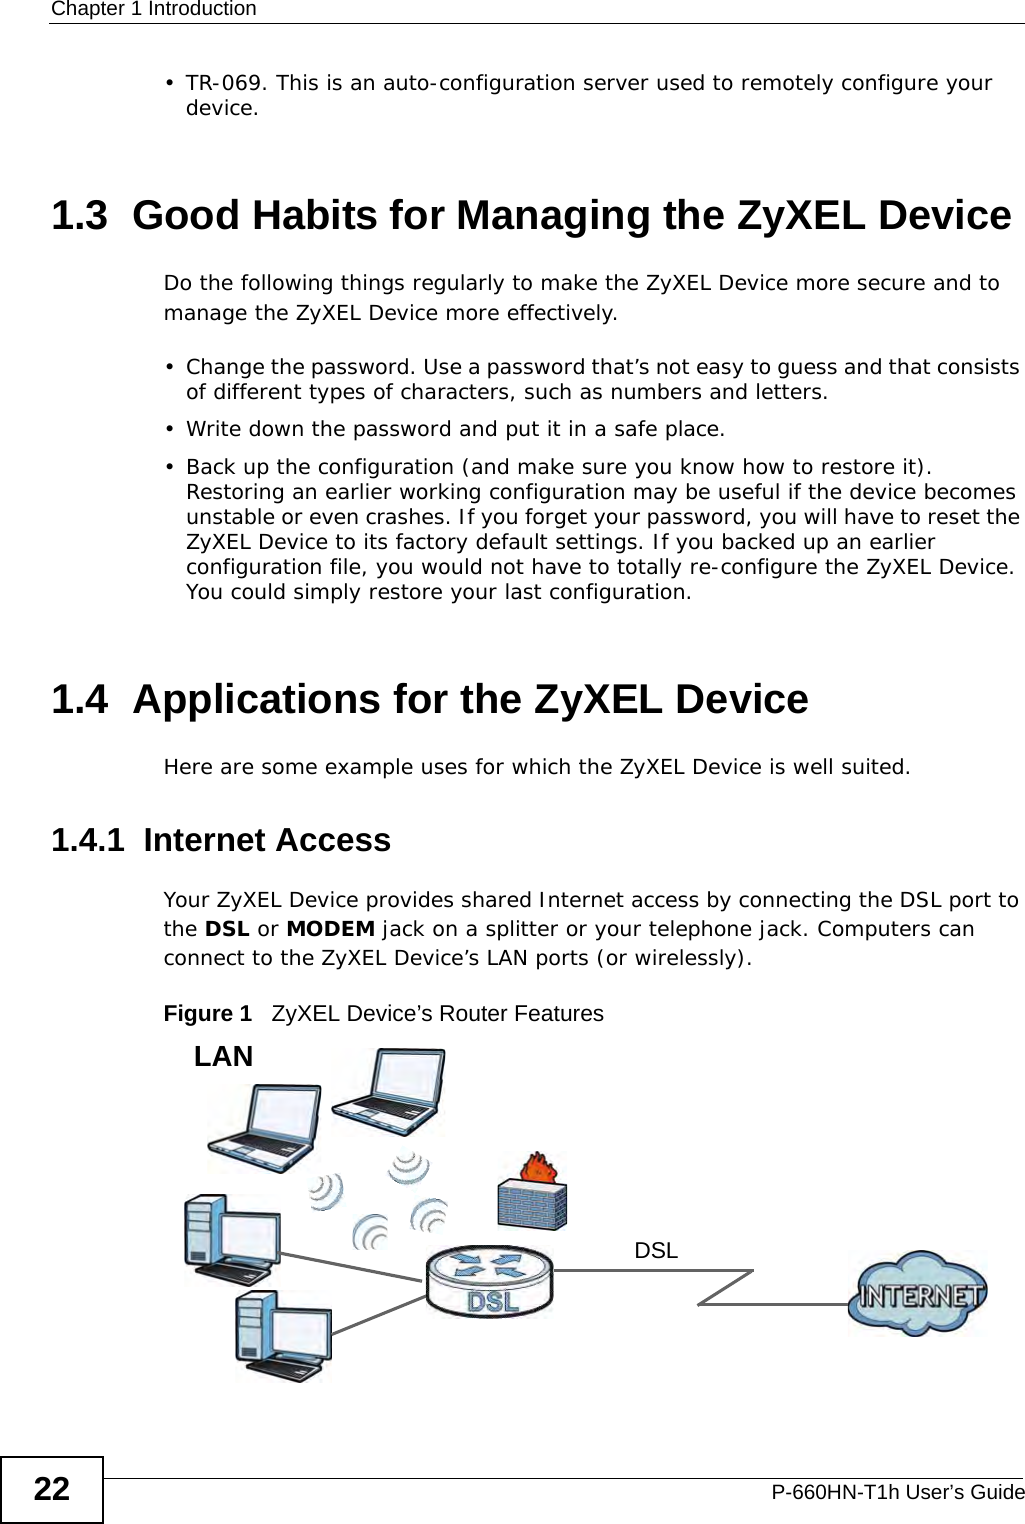 Chapter 1 IntroductionP-660HN-T1h User’s Guide22• TR-069. This is an auto-configuration server used to remotely configure your device.1.3  Good Habits for Managing the ZyXEL DeviceDo the following things regularly to make the ZyXEL Device more secure and to manage the ZyXEL Device more effectively.• Change the password. Use a password that’s not easy to guess and that consists of different types of characters, such as numbers and letters.• Write down the password and put it in a safe place.• Back up the configuration (and make sure you know how to restore it). Restoring an earlier working configuration may be useful if the device becomes unstable or even crashes. If you forget your password, you will have to reset the ZyXEL Device to its factory default settings. If you backed up an earlier configuration file, you would not have to totally re-configure the ZyXEL Device. You could simply restore your last configuration.1.4  Applications for the ZyXEL DeviceHere are some example uses for which the ZyXEL Device is well suited.1.4.1  Internet AccessYour ZyXEL Device provides shared Internet access by connecting the DSL port to the DSL or MODEM jack on a splitter or your telephone jack. Computers can connect to the ZyXEL Device’s LAN ports (or wirelessly).Figure 1   ZyXEL Device’s Router FeaturesDSLLAN